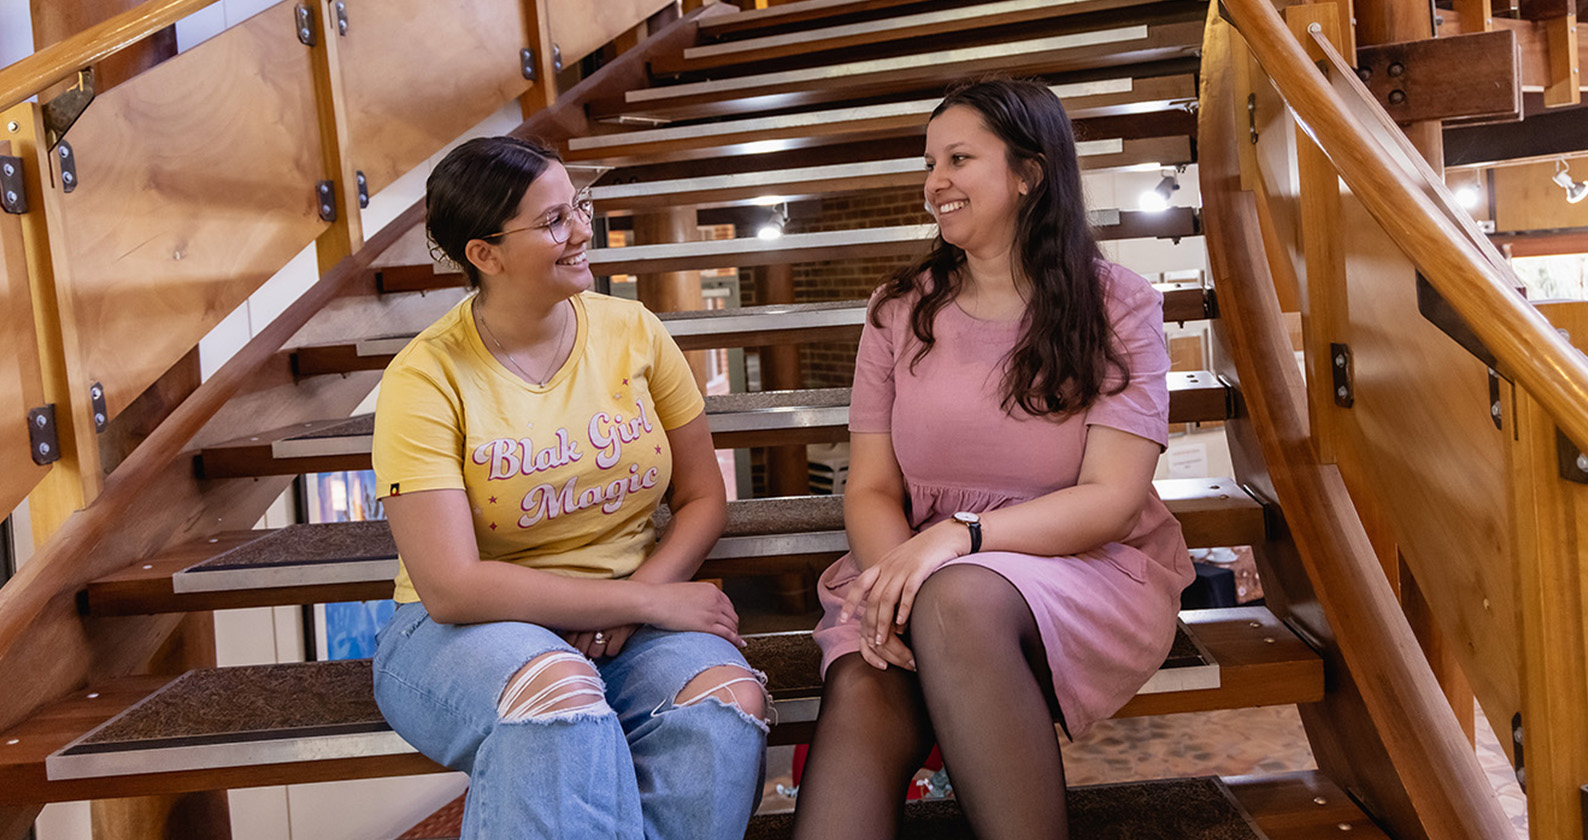 Two female indigenous students sitting on stairs and talking while smiling.